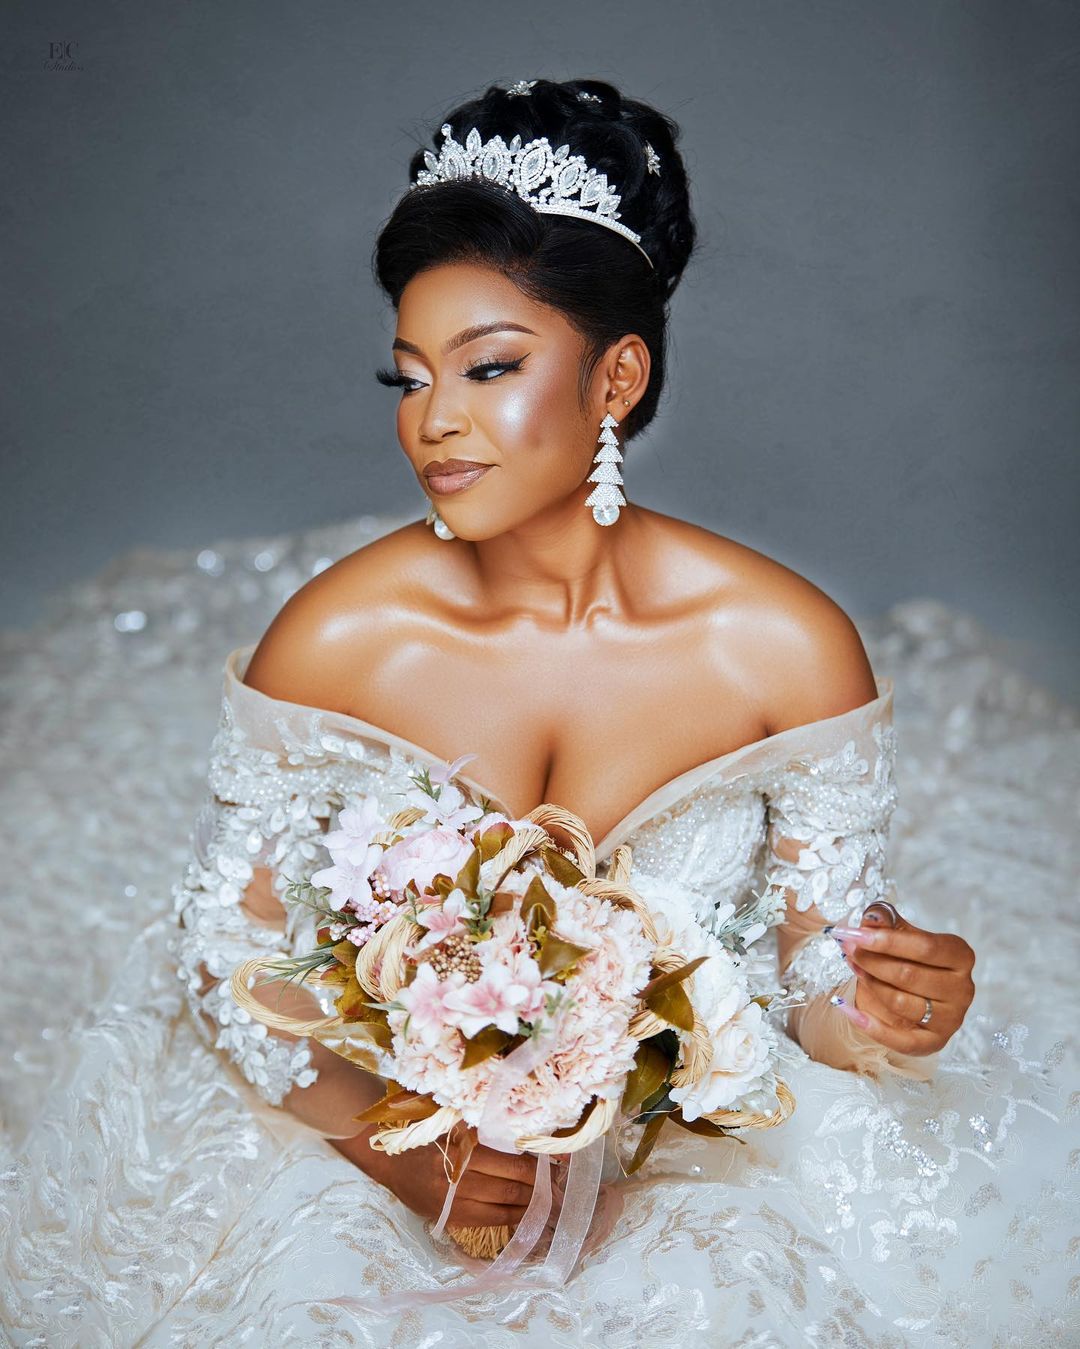 This Dreamy Bridal Beauty Look Reminds Us Of Happy Endings